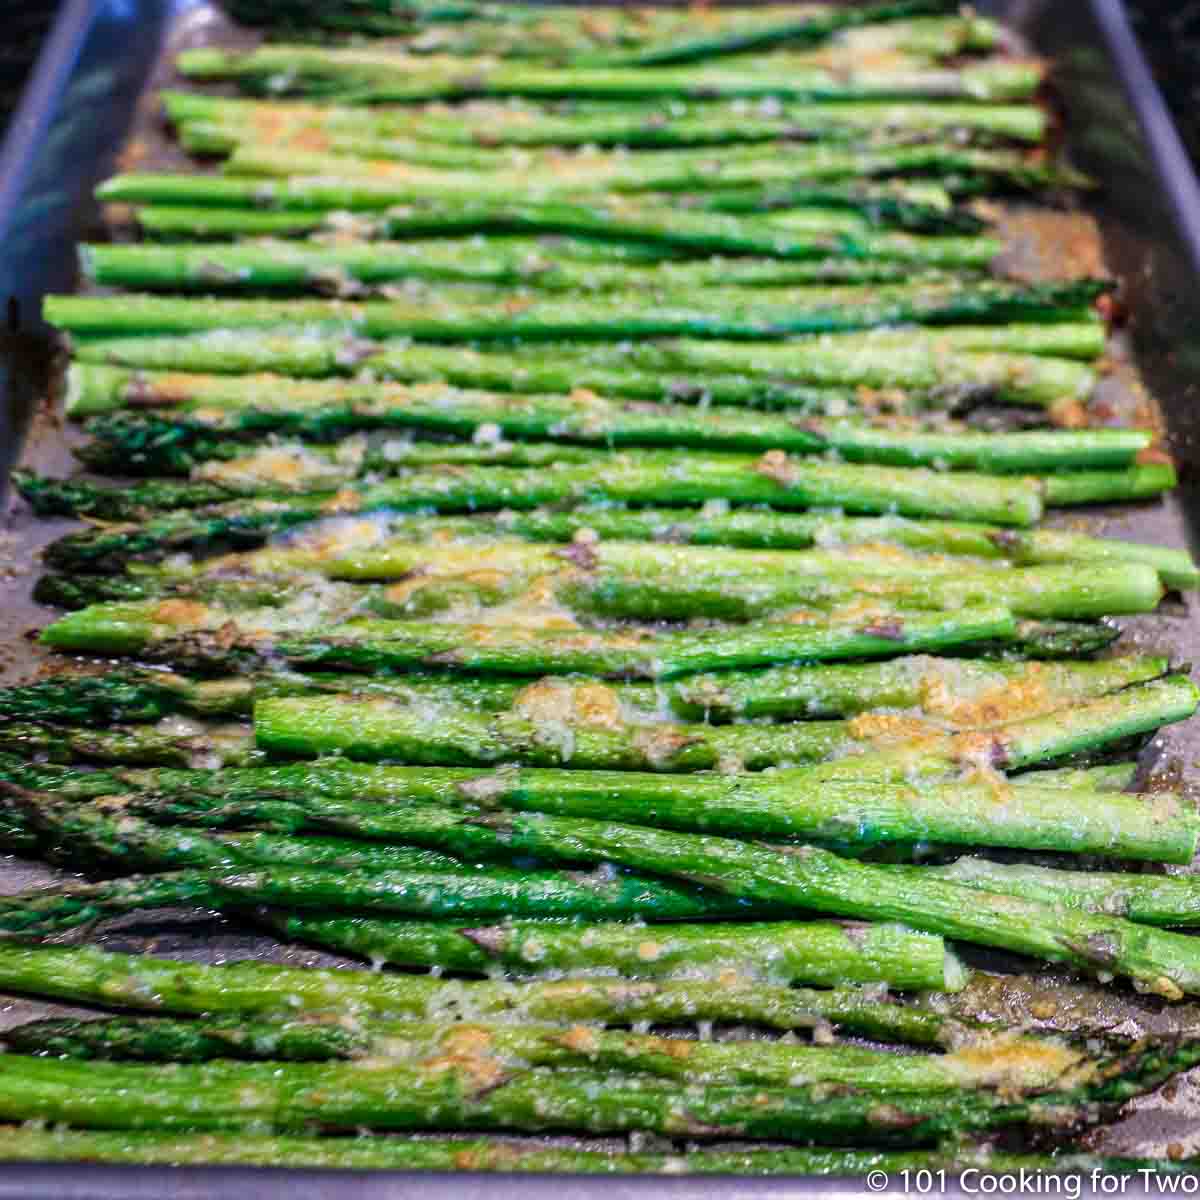 Parmesan coated asparagus out of the oven on the tray.